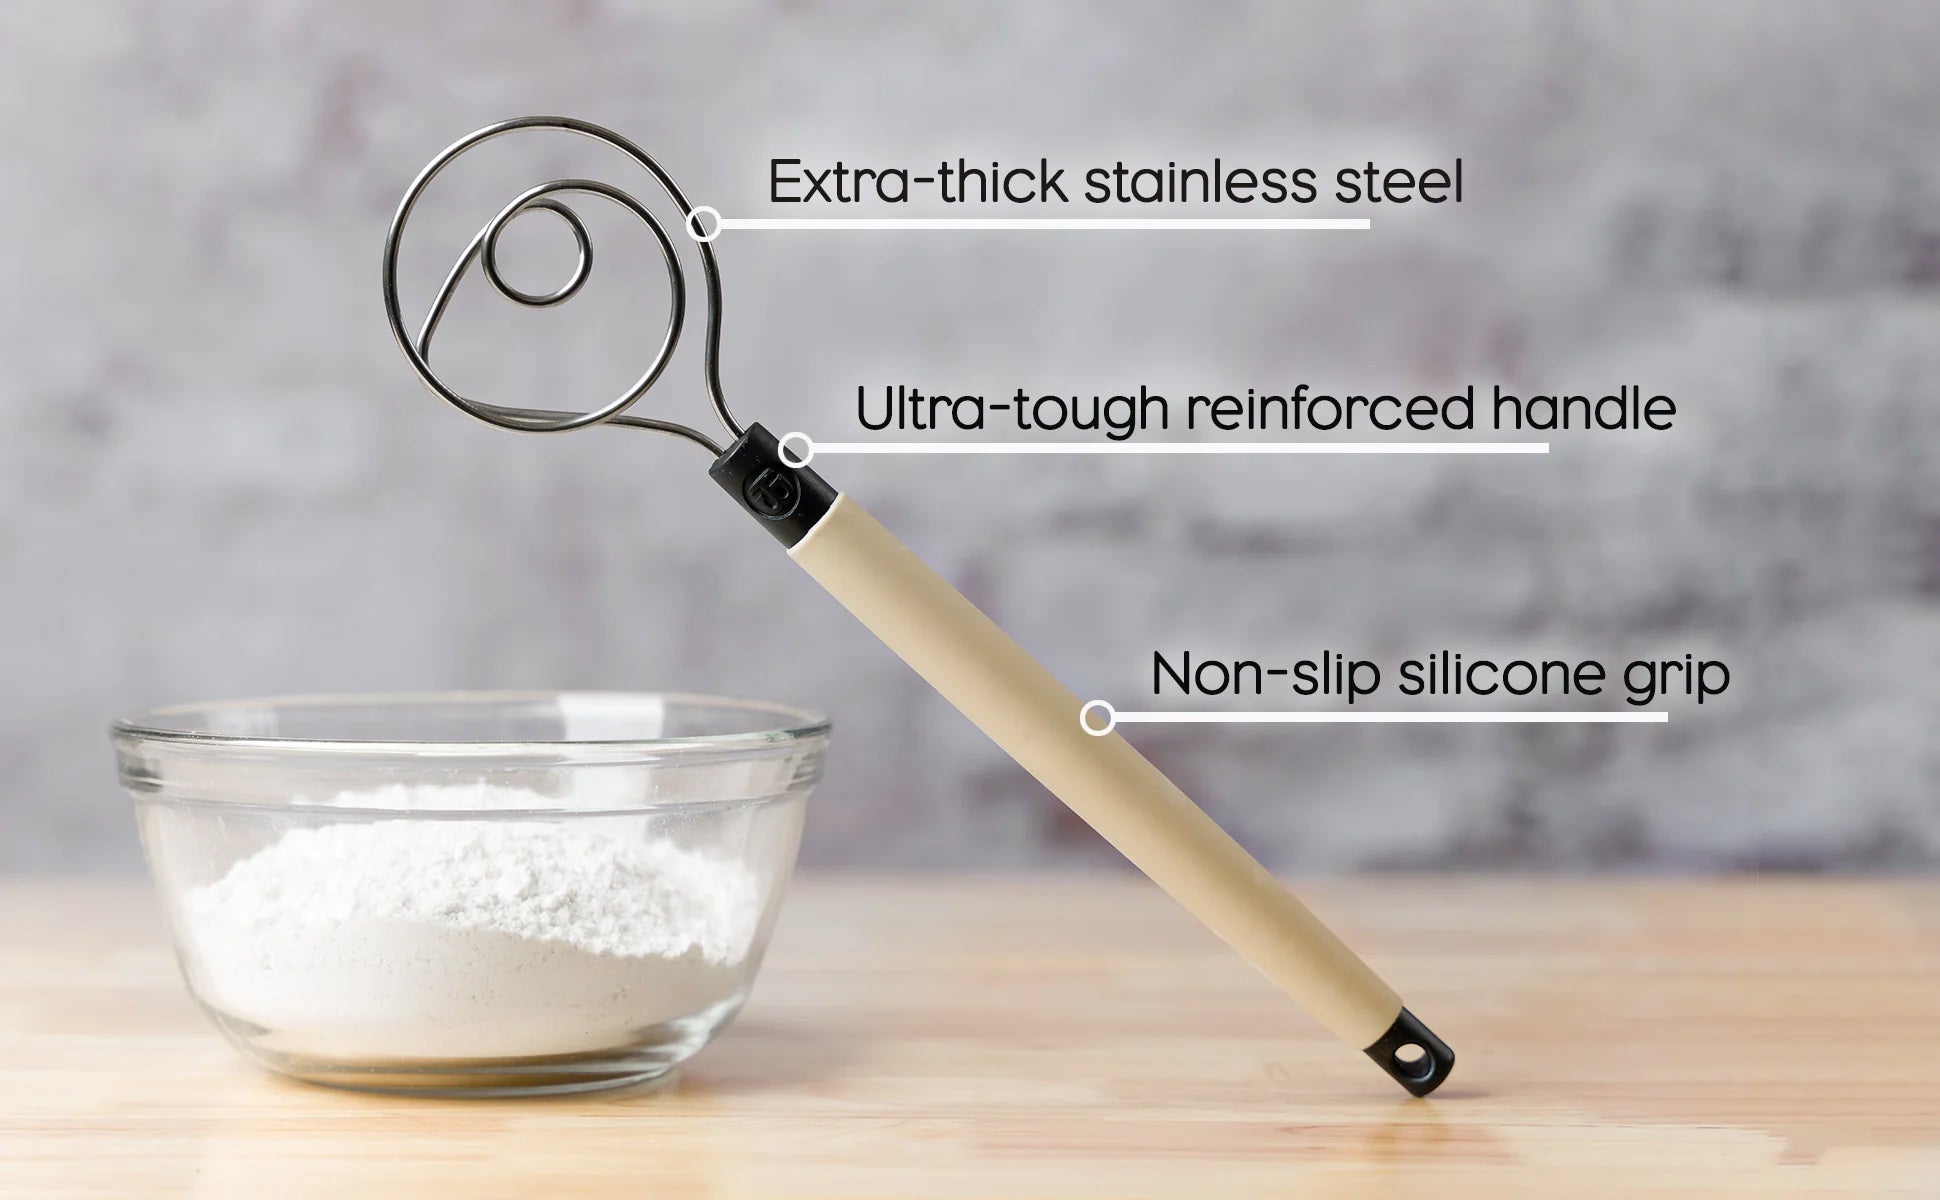 Brod & Taylor Dough Whisk - Heavy Duty Dishwasher-Safe Mixing Tool